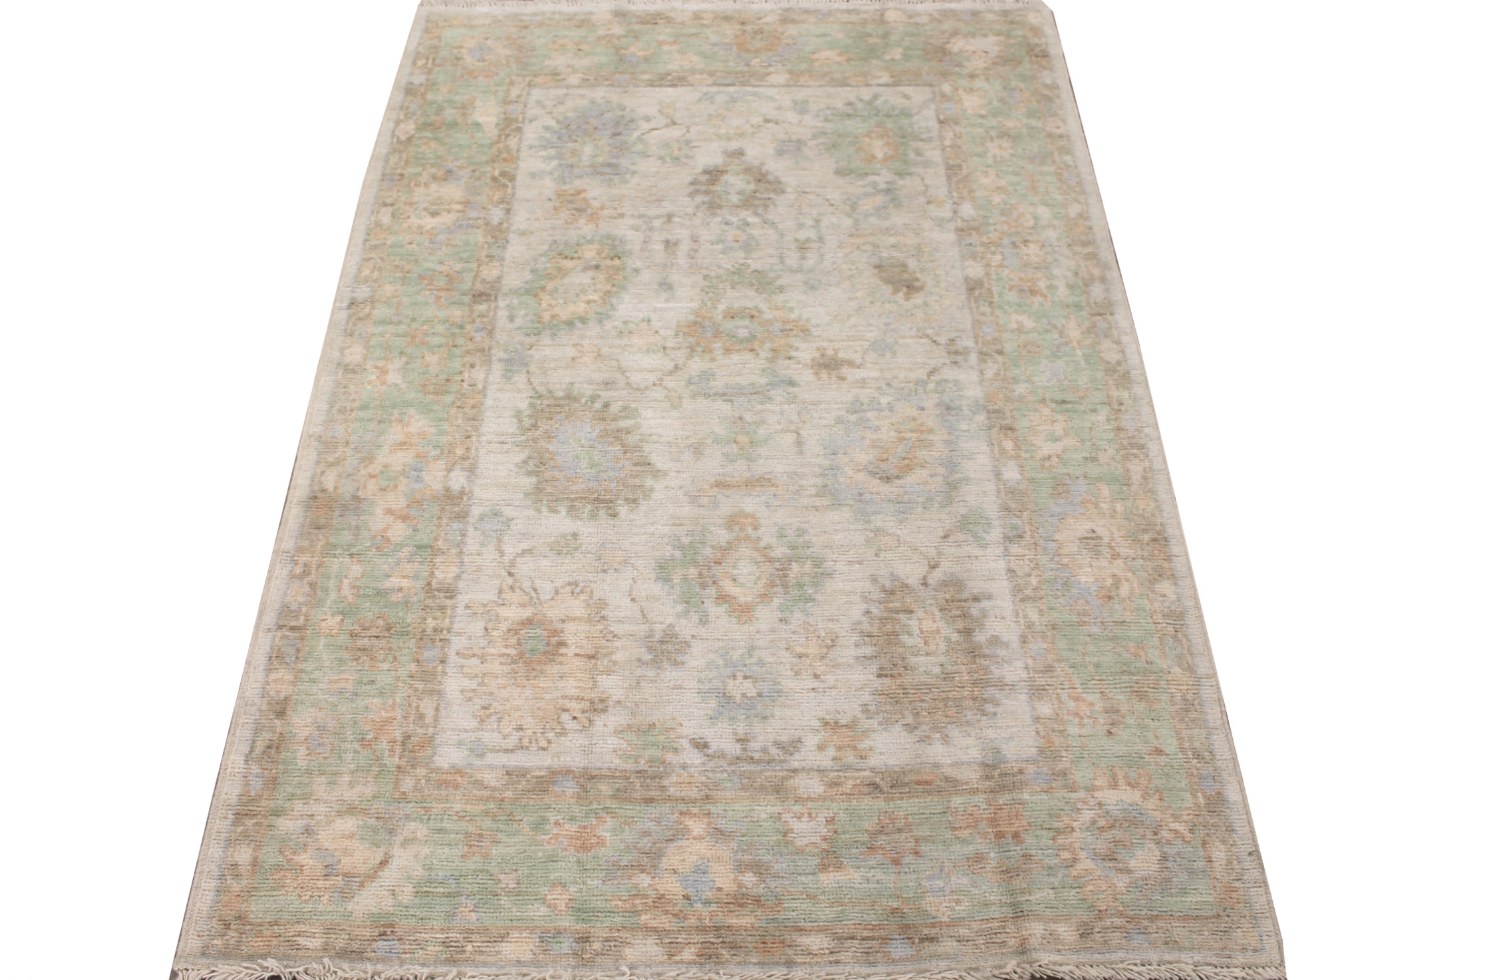 4x6 Oushak Hand Knotted Wool Area Rug - MR028466